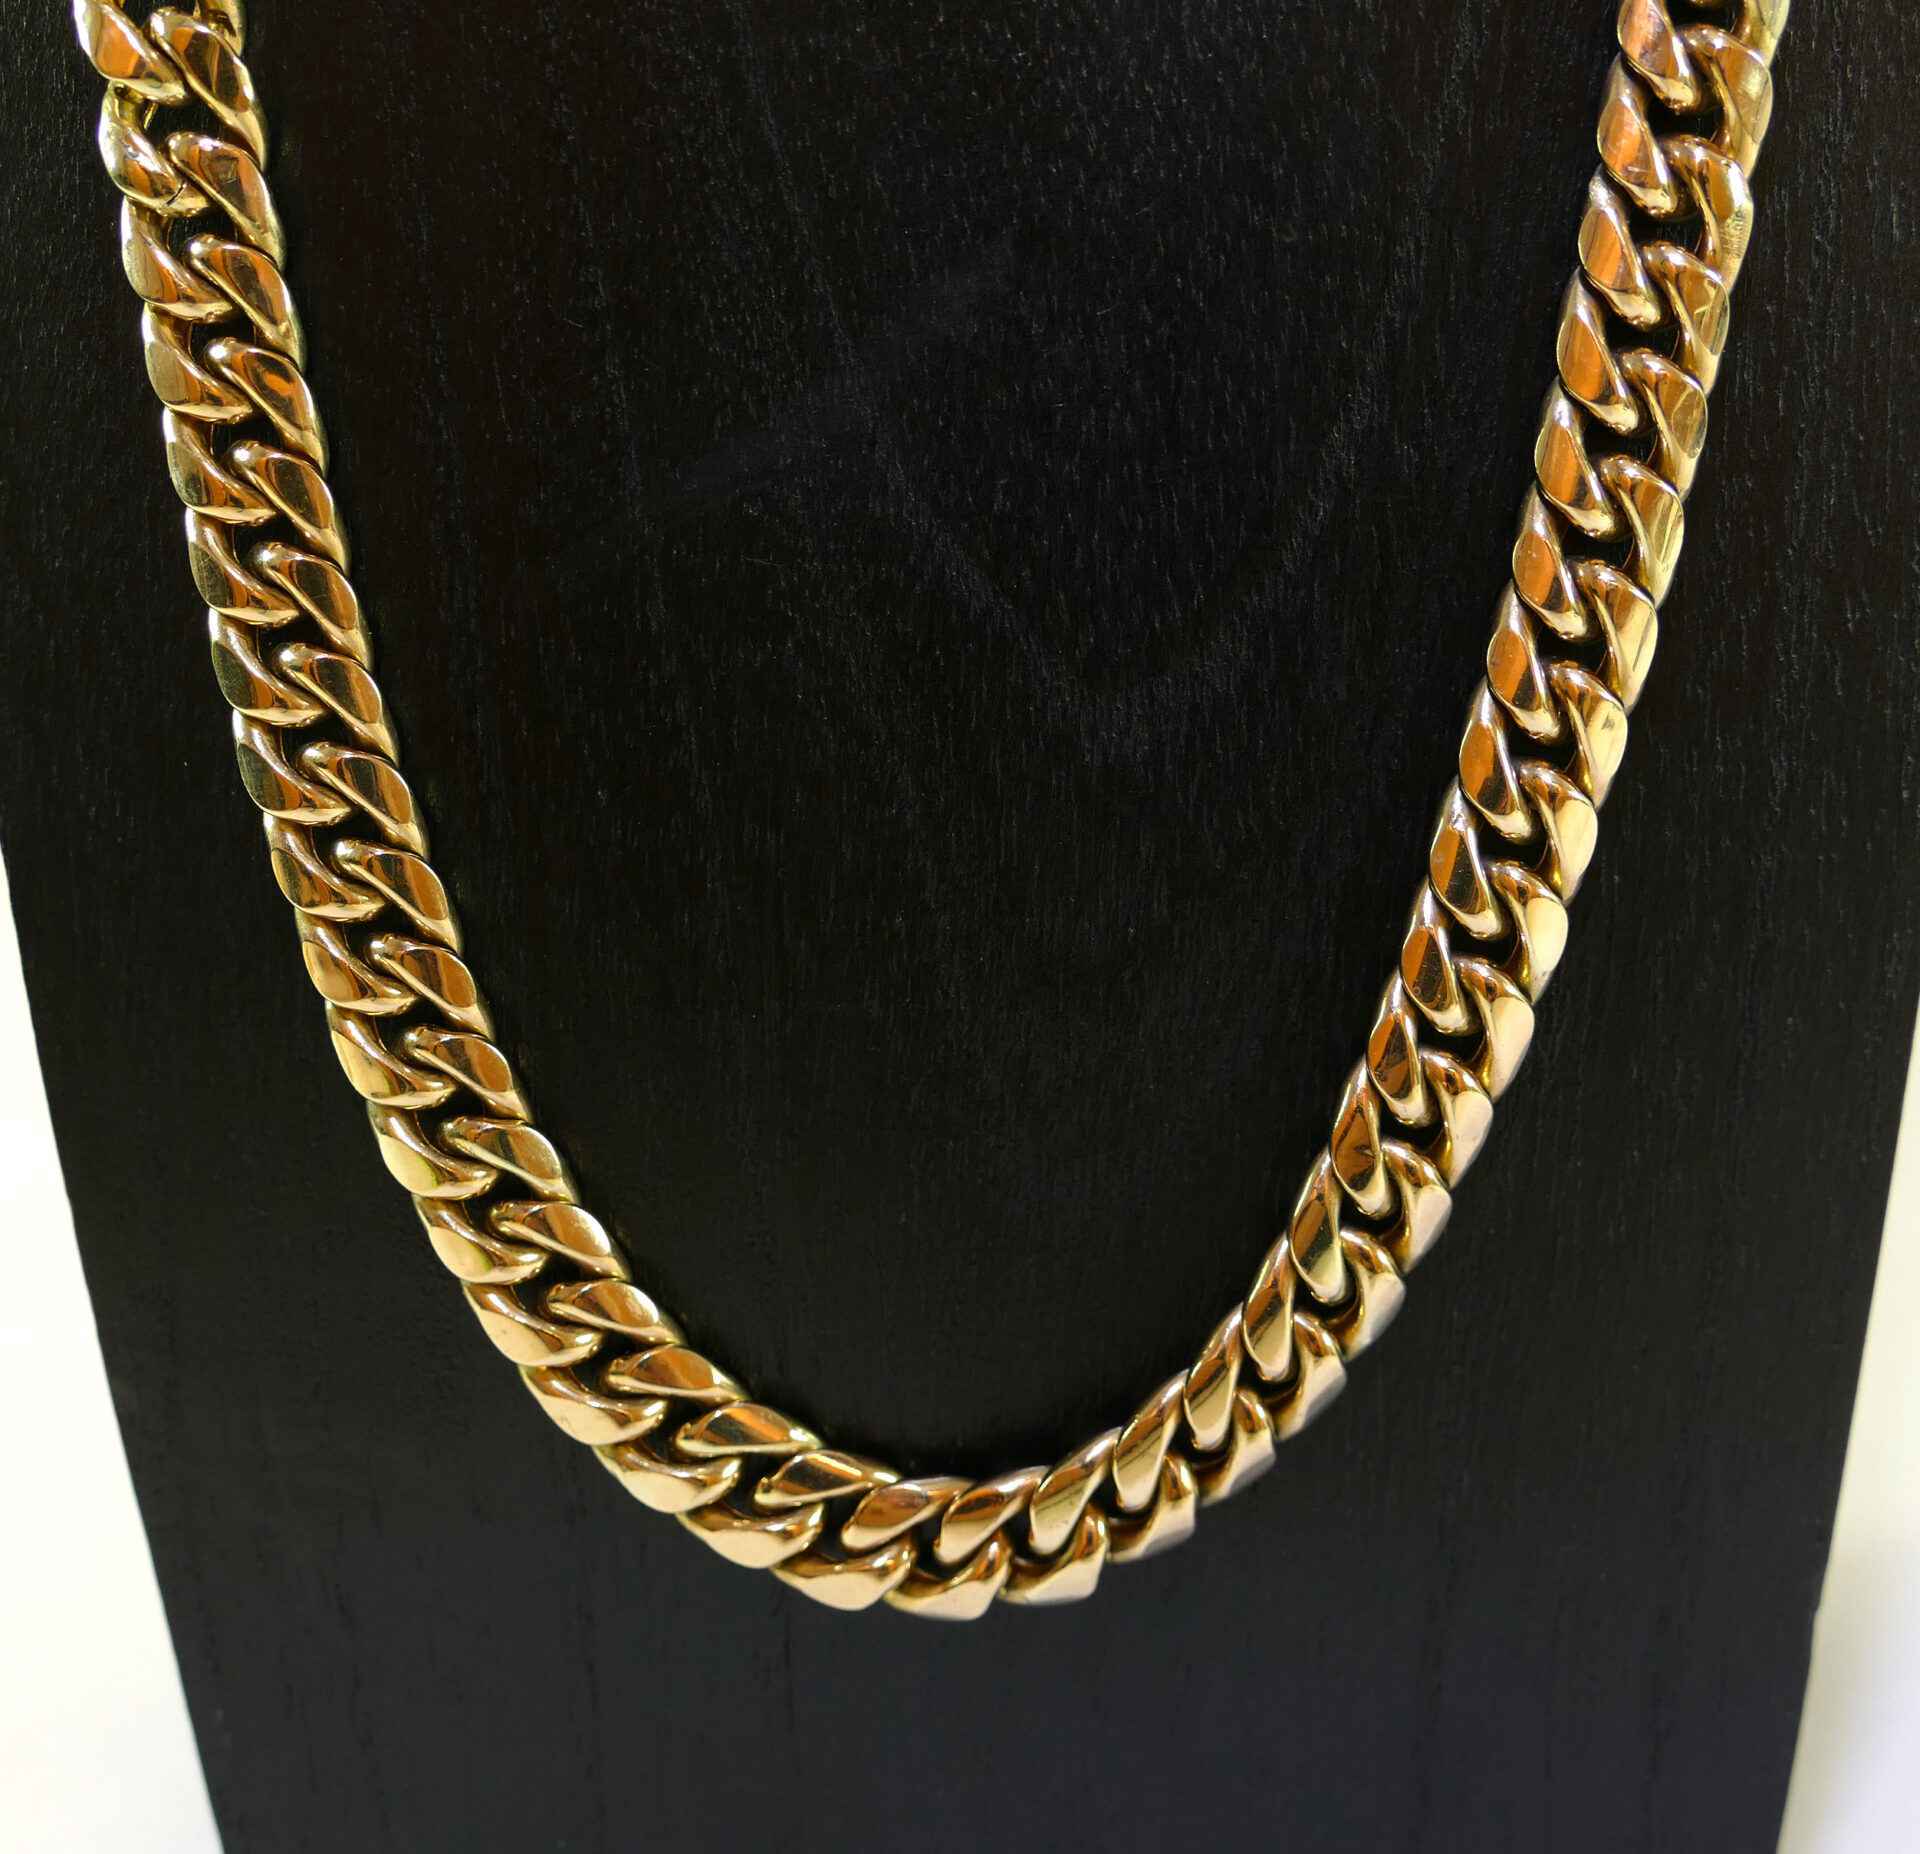 Miami Cuban Hollow Link 10k Yellow Gold Chain Necklace 26" 9mm - 54.4